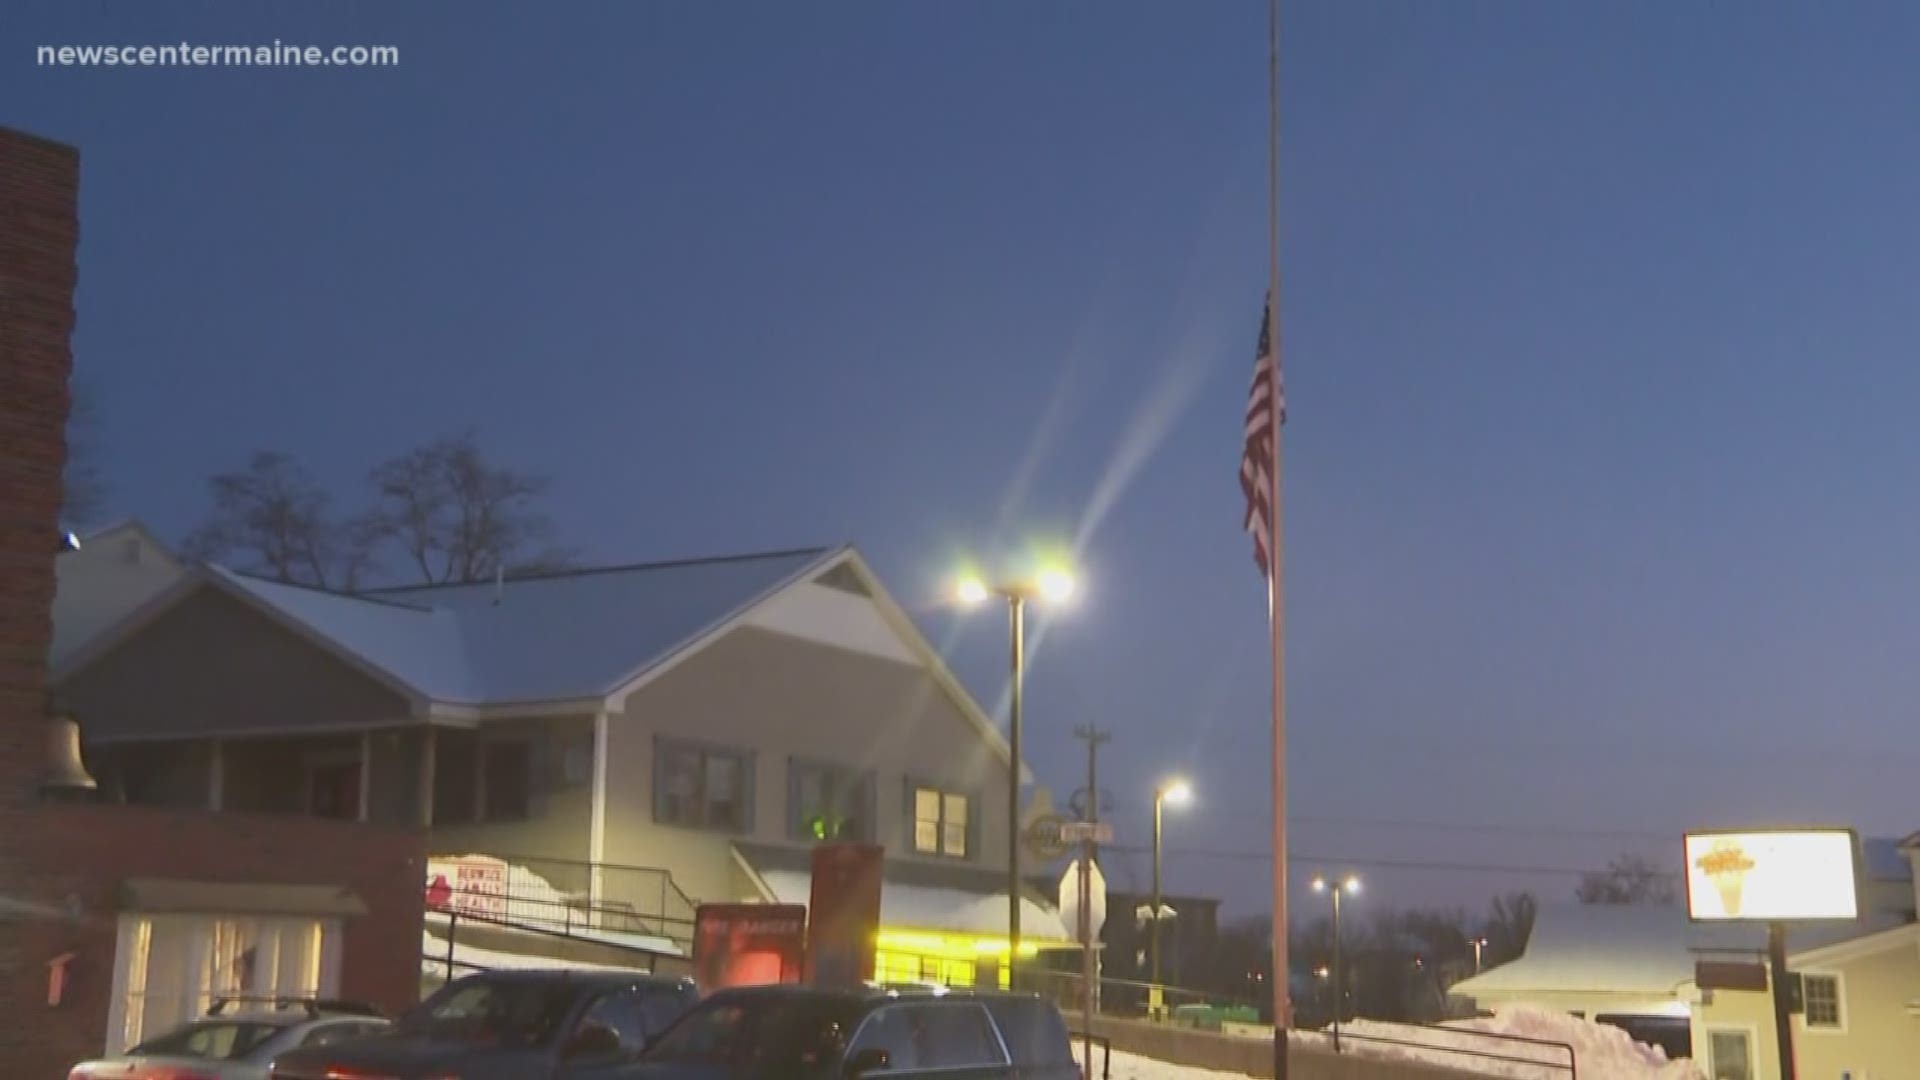 Gov. Janet Mills asked that flags across the state be flow at half-staff in honor of Captain Joel Barnes.